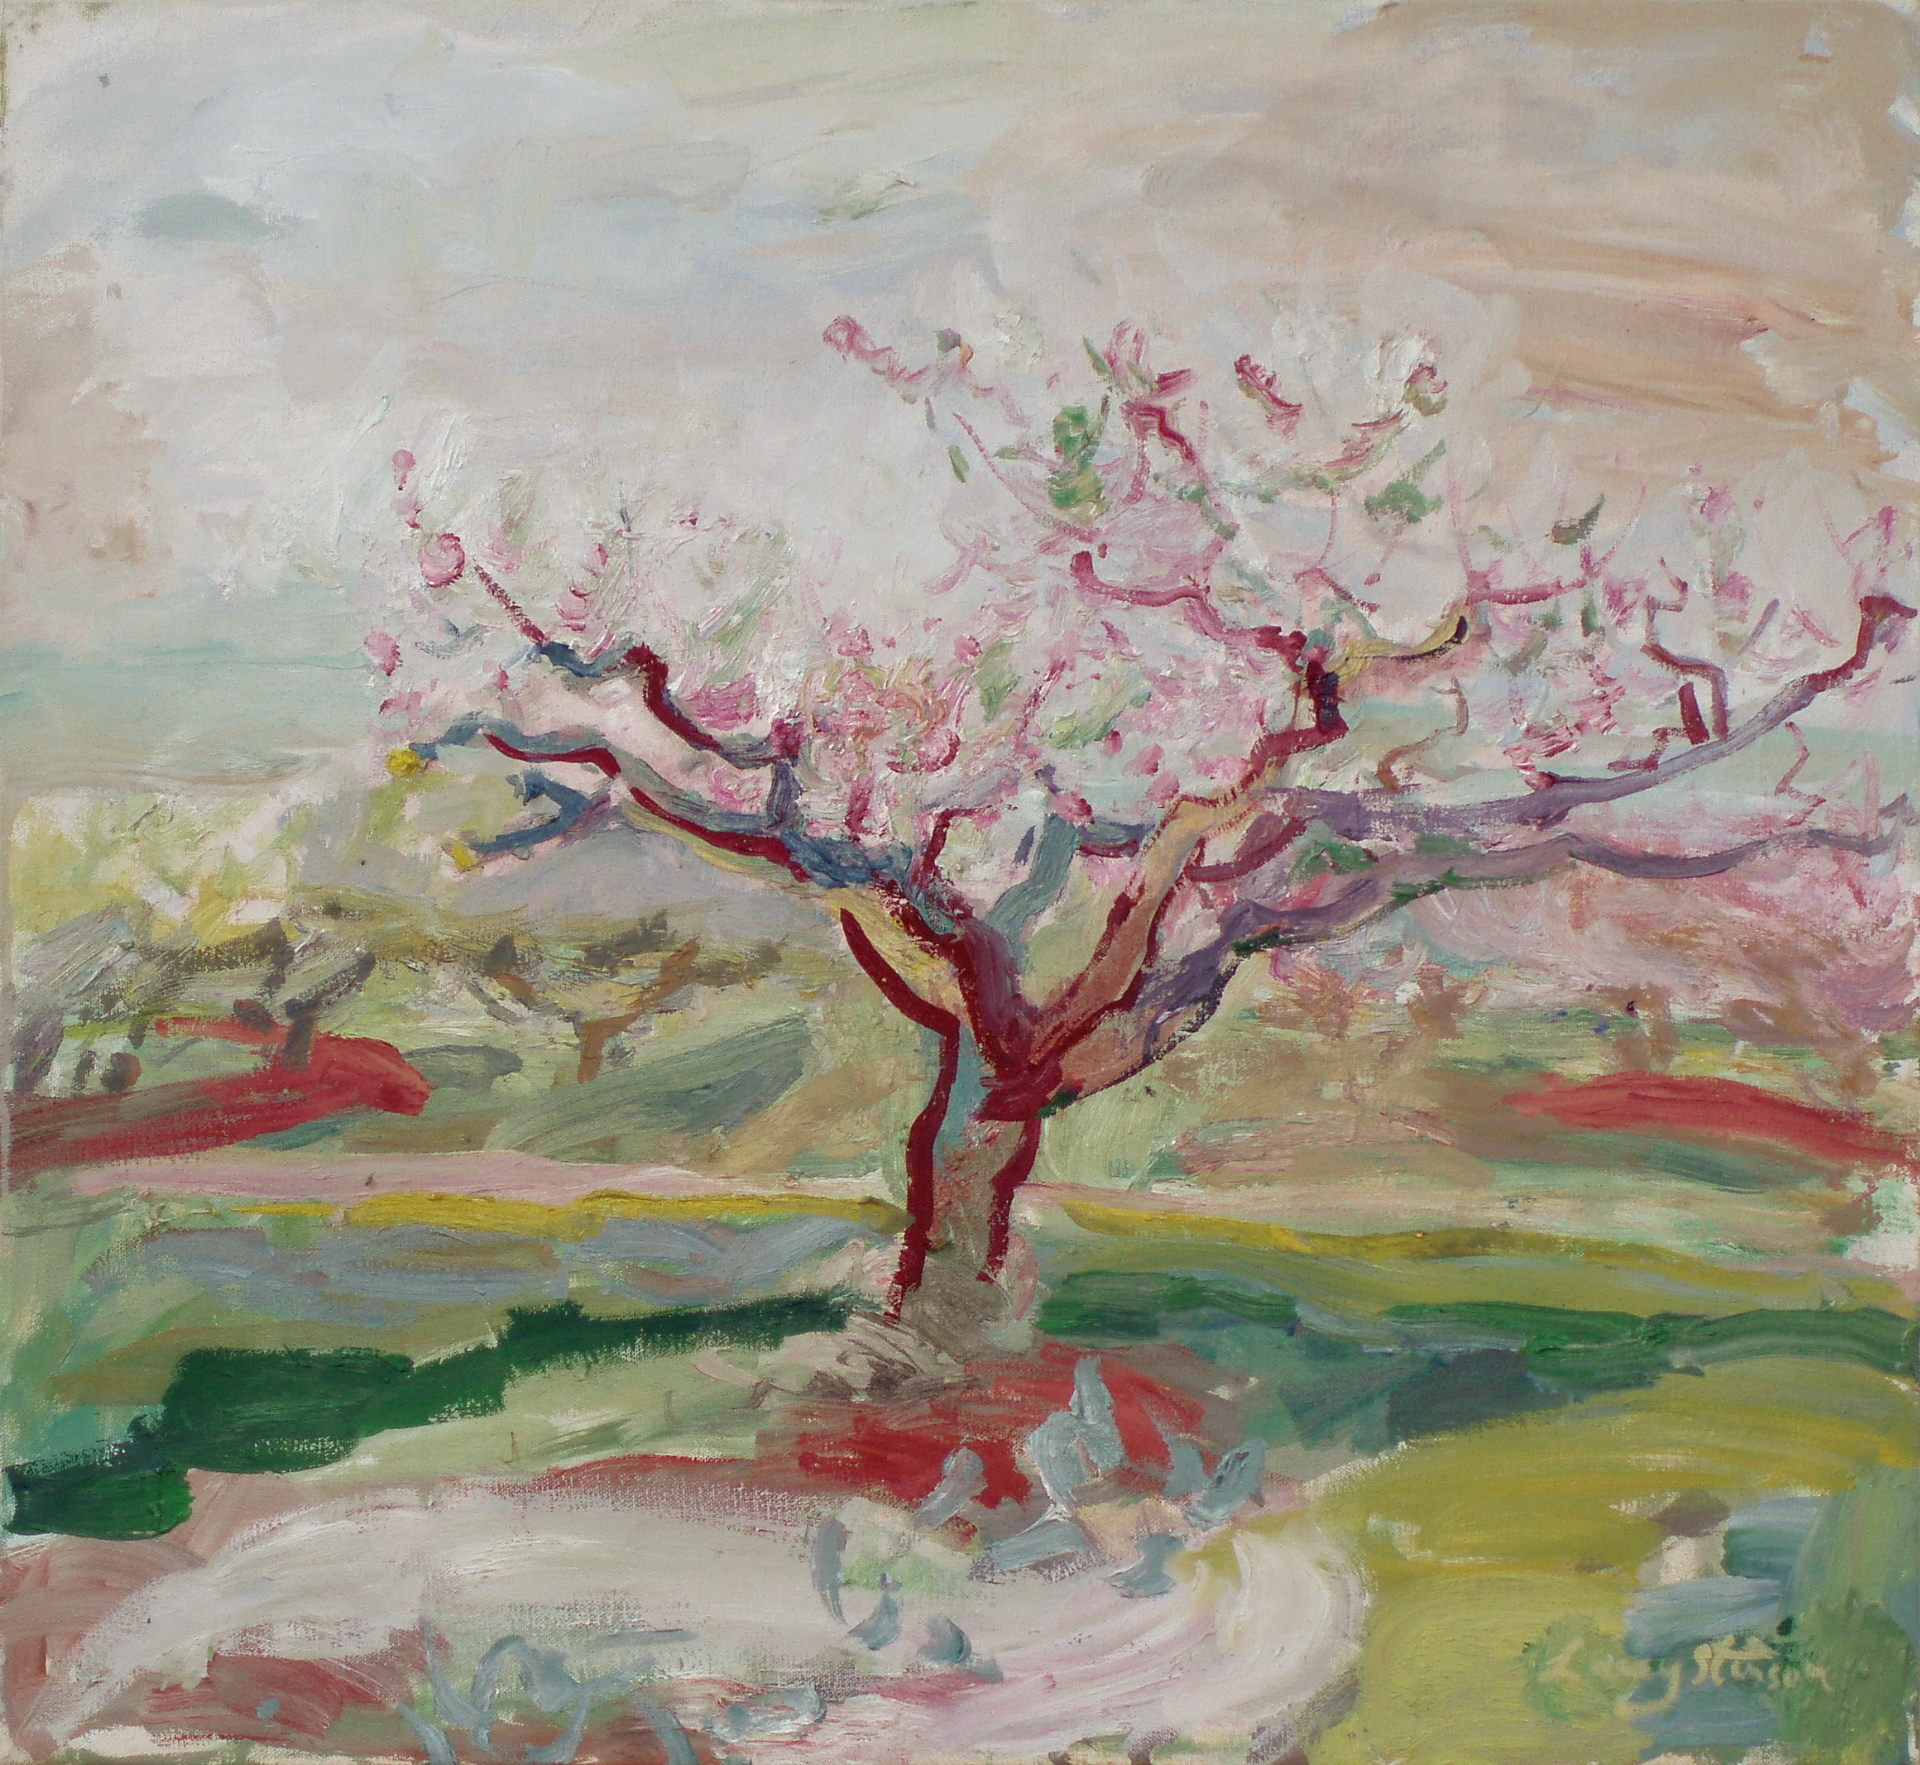 Peach Tree in Bloom, sketch, by Lacey Stinson